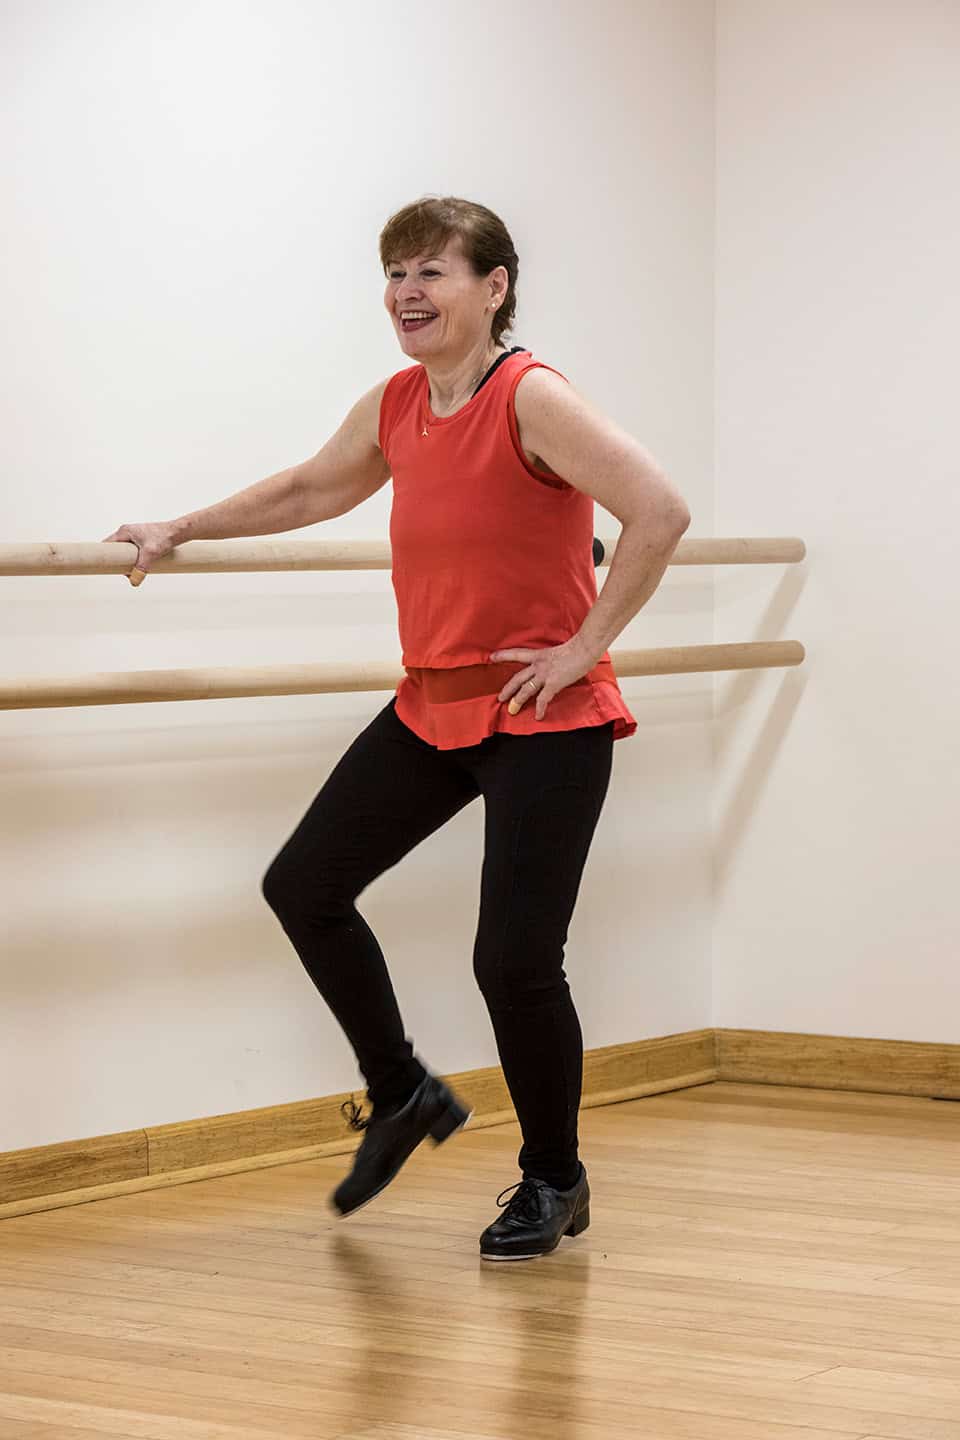 A woman in a red sleeveless top and black pants is tap dancing in a dance studio. She is smiling and balancing with one hand on a ballet barre, with one leg slightly lifted. The room has light-colored walls and wooden flooring.